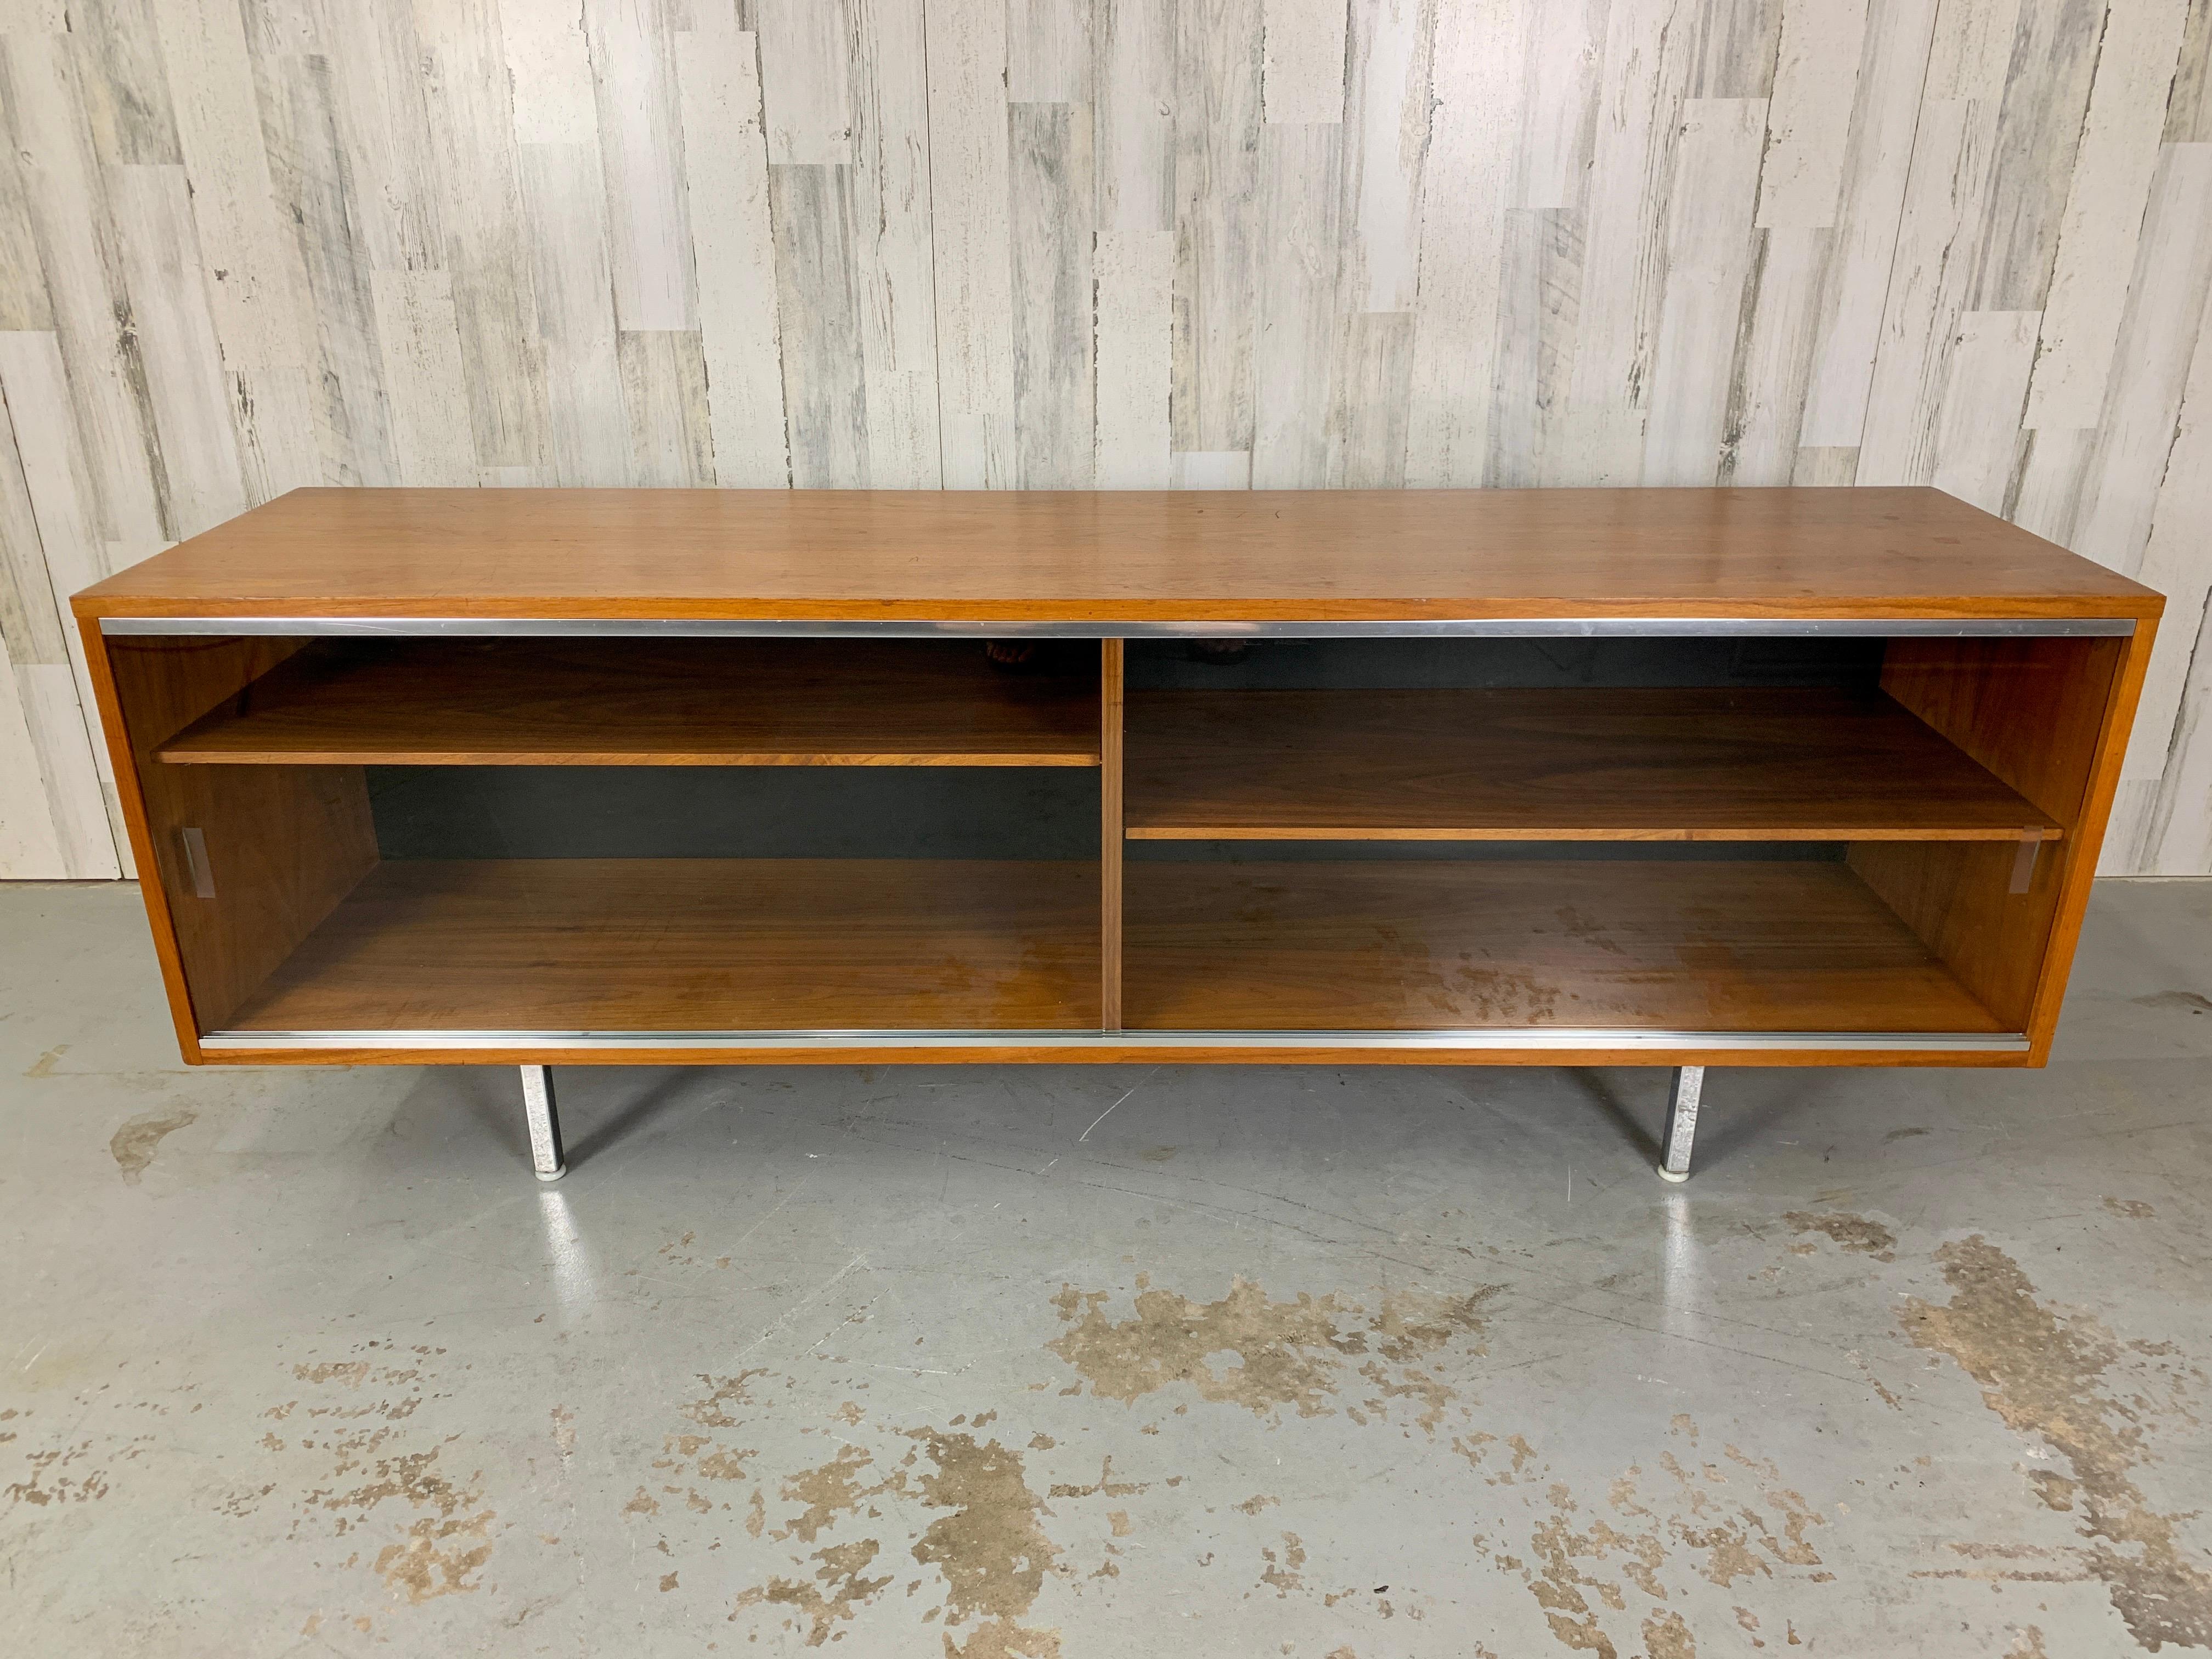 Rare Glass sliding doors on a walnut display cabinet with adjustable shelves.
Chrome legs with original Domes of silence glides.
The Herman Miller badge is missing, please see pictures of where the badge was located.
All original condition.